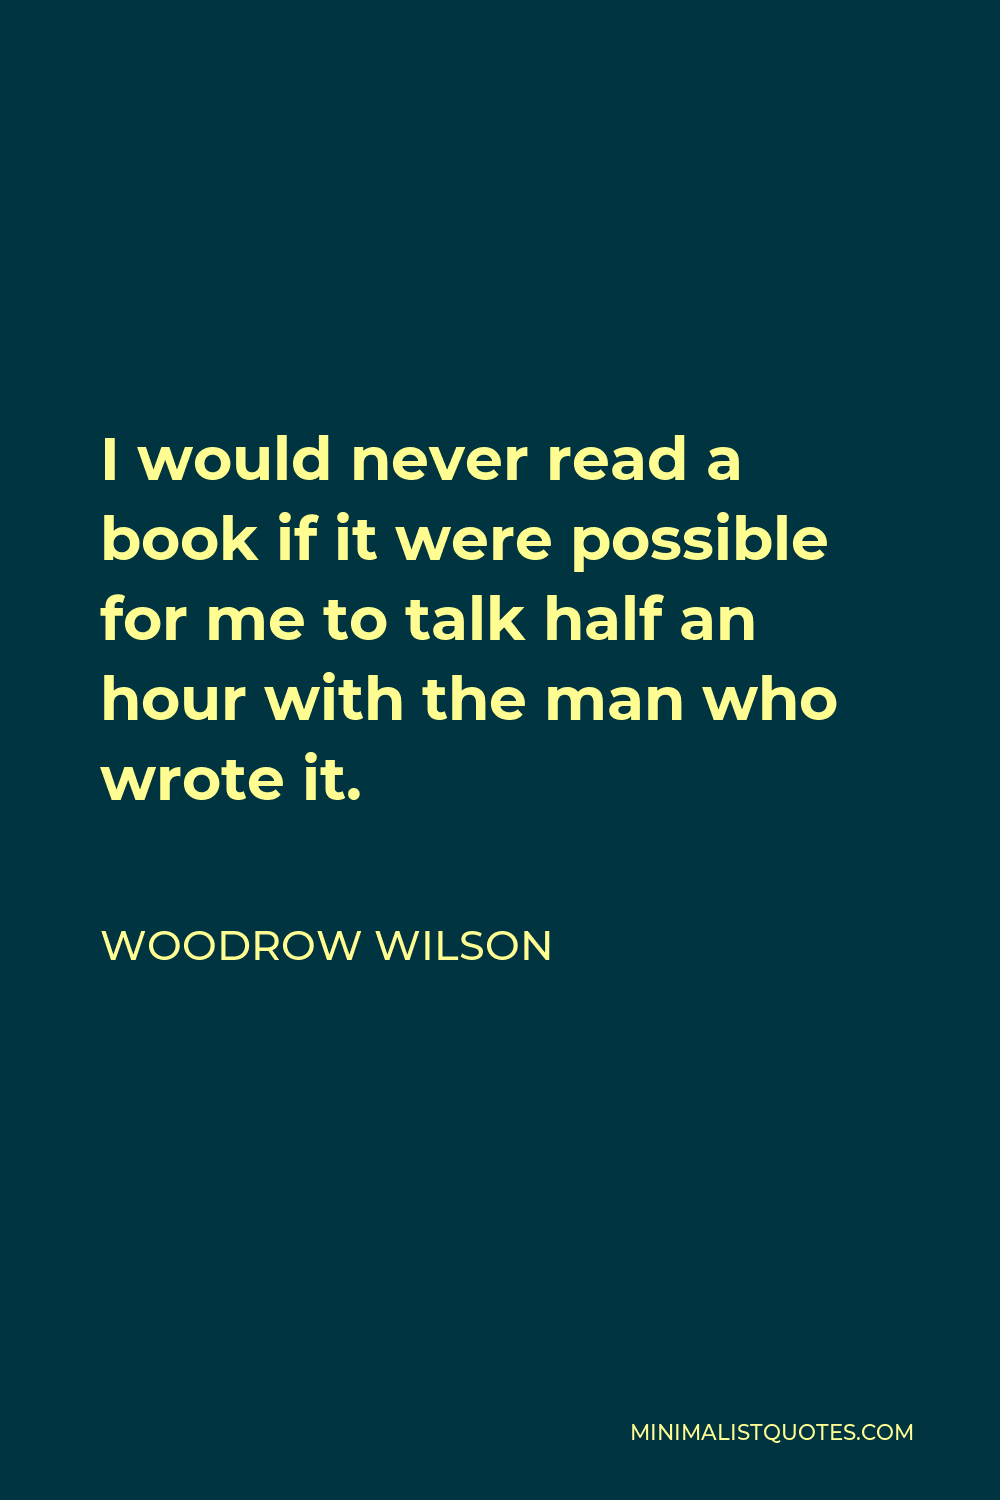 Woodrow Wilson Quote - I would never read a book if it were possible for me to talk half an hour with the man who wrote it.